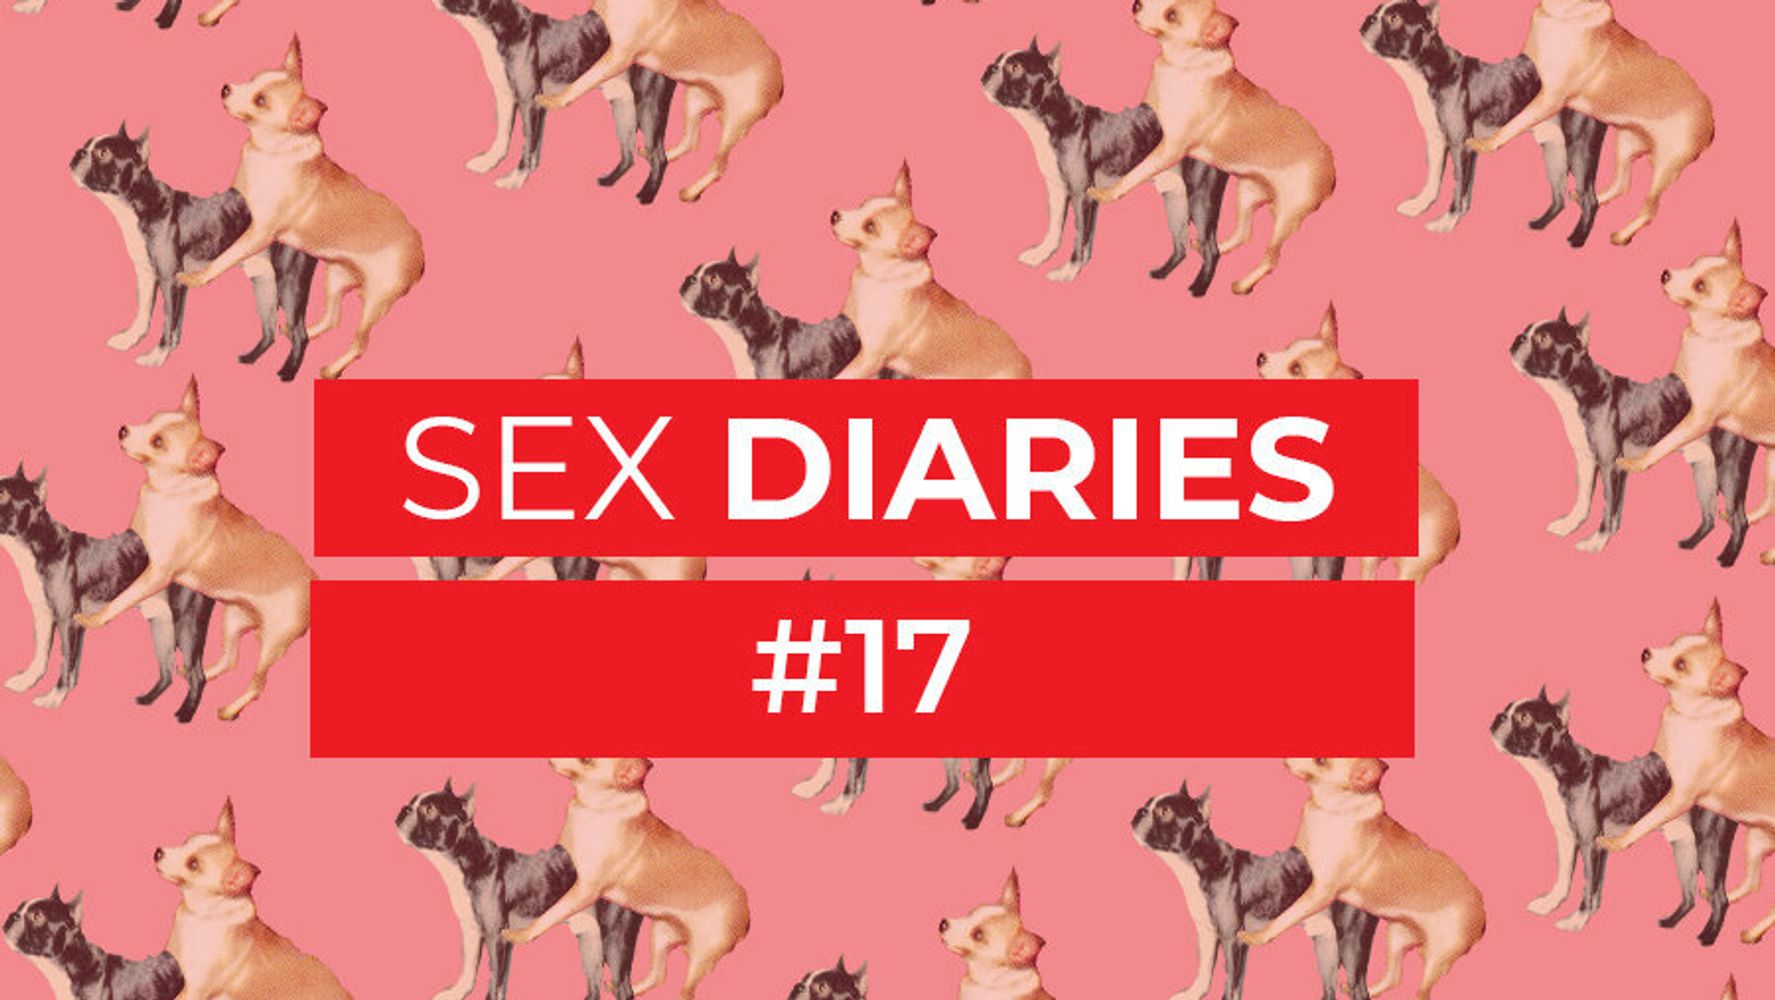 Sex Diaries Top Or Bottom Im Still Learning About Gay Sex 5 Years